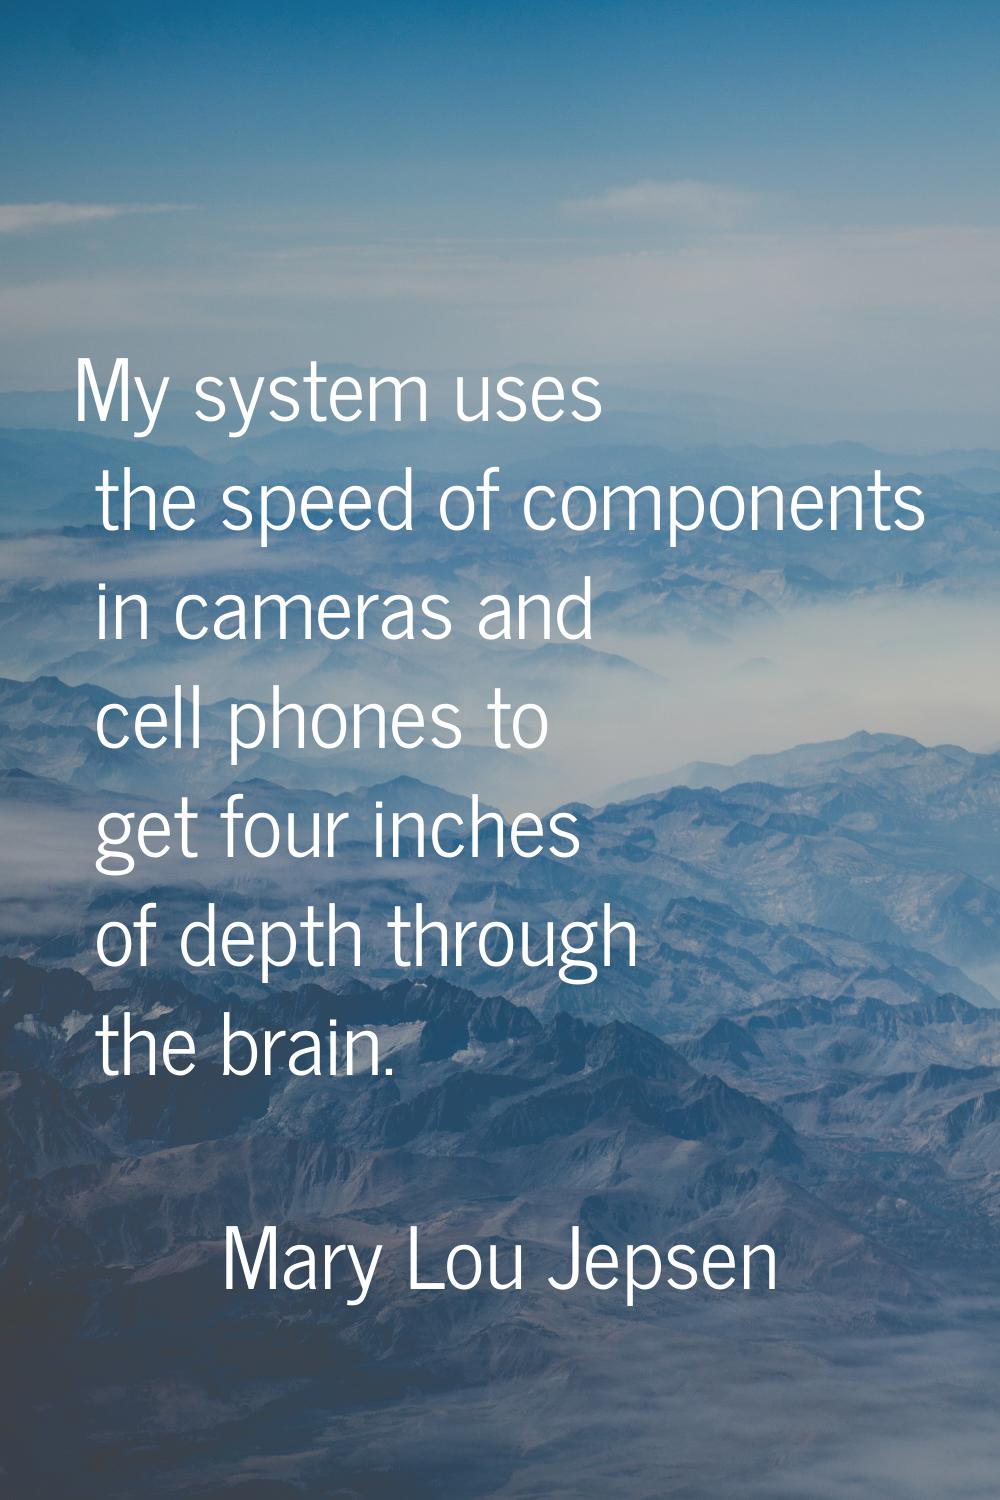 My system uses the speed of components in cameras and cell phones to get four inches of depth throu